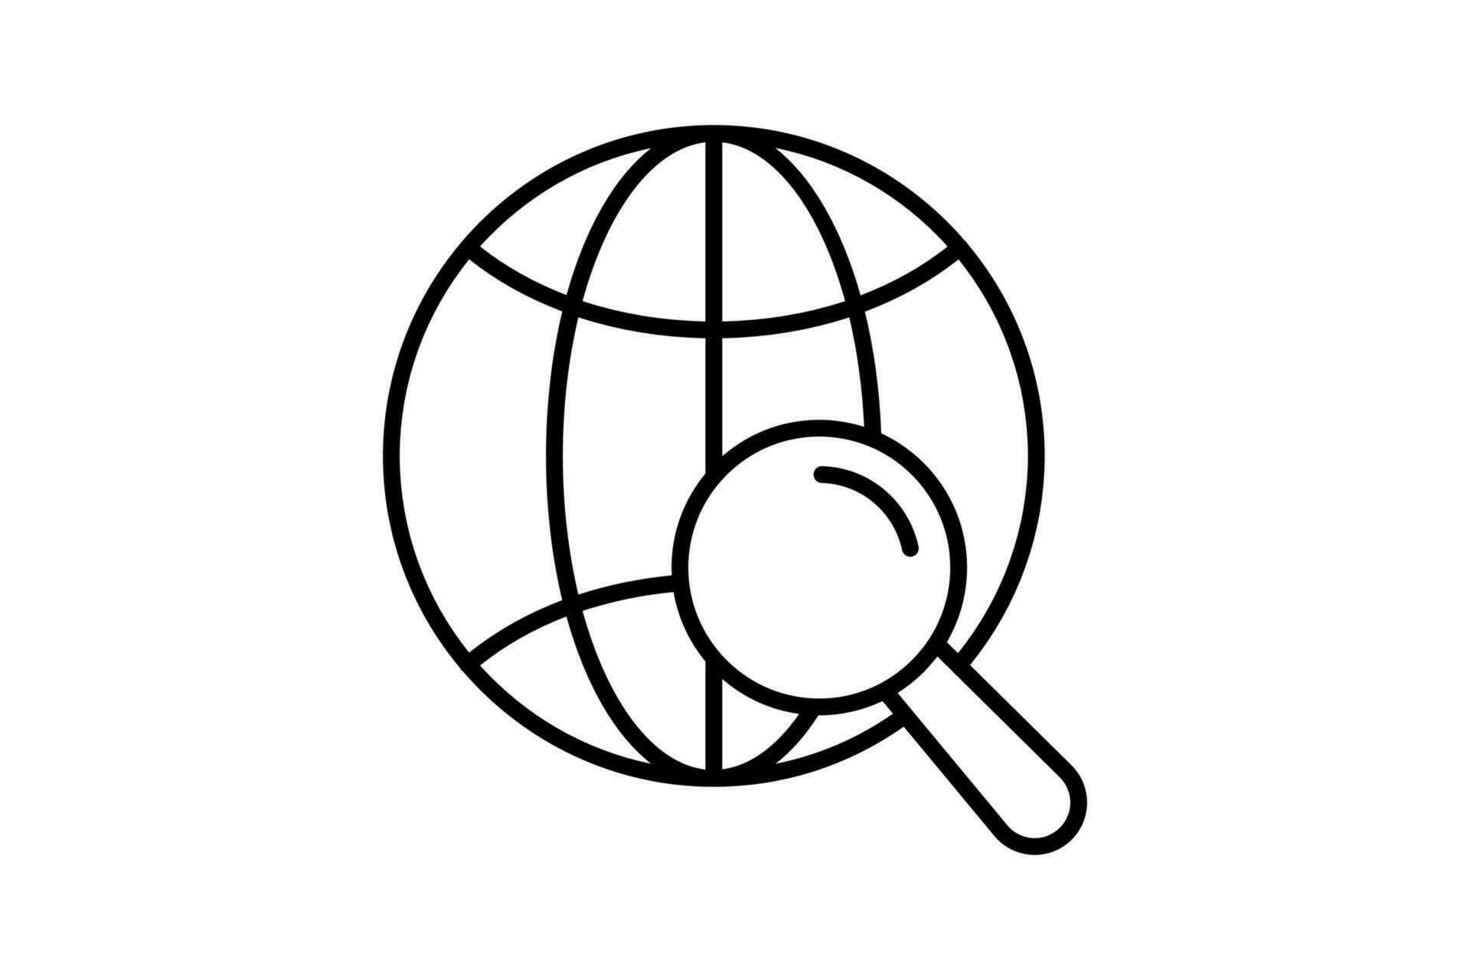 Global search icon. Icon related to Search Engine Optimization. suitable for web site design, app, user interfaces. line icon style. Simple vector design editable